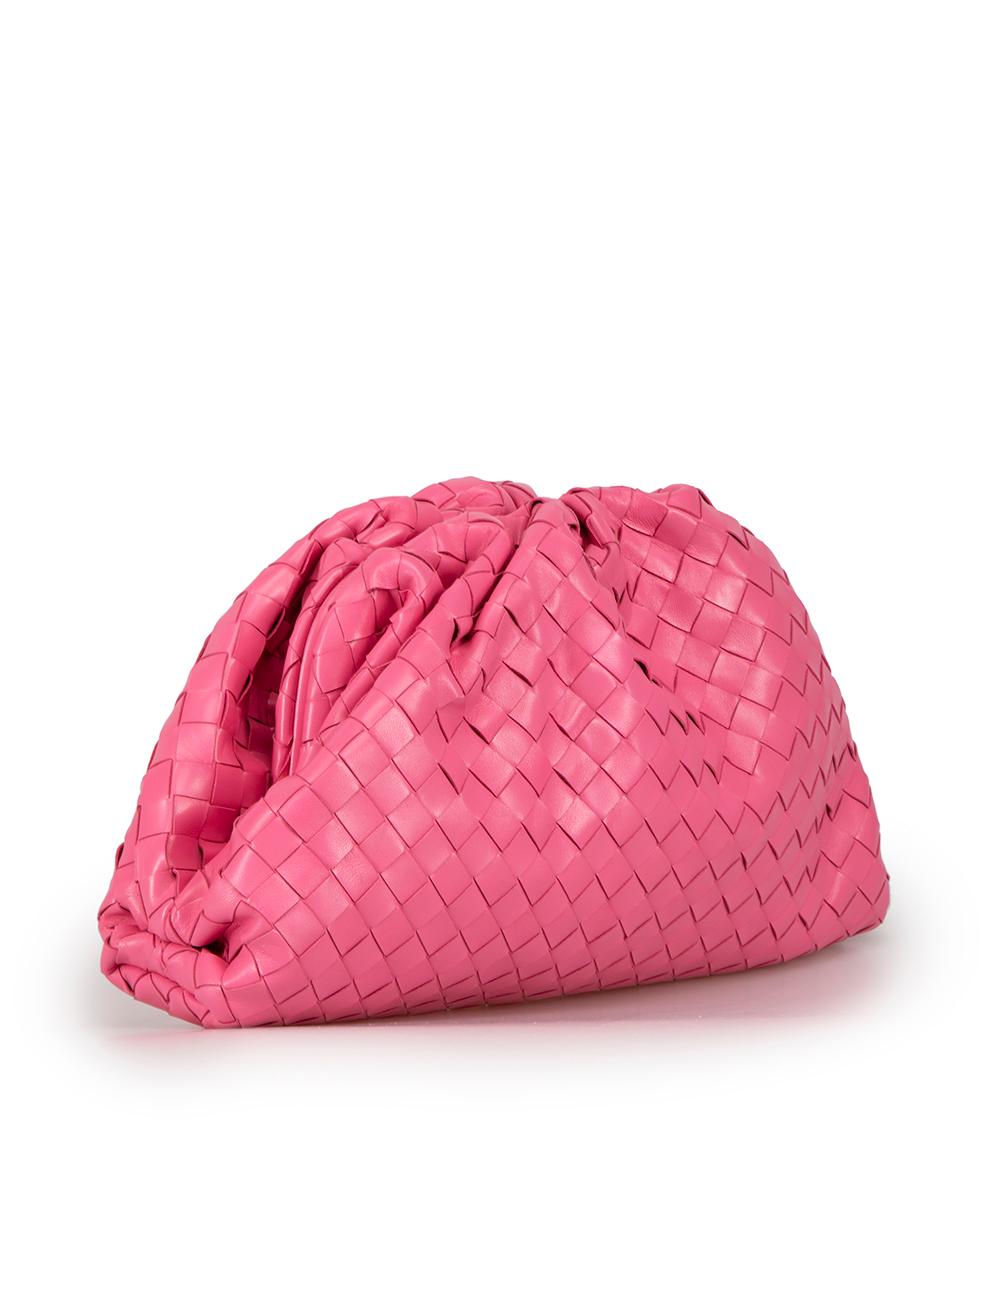 CONDITION is Very good. Minimal wear to clutch is evident. Minimal scratch to bottom of bag on this used Bottega Veneta designer resale item. This item comes with original dust bag.

Details
Pink
Leather
Large clutch bag
Intrecciato weave
Magnetic